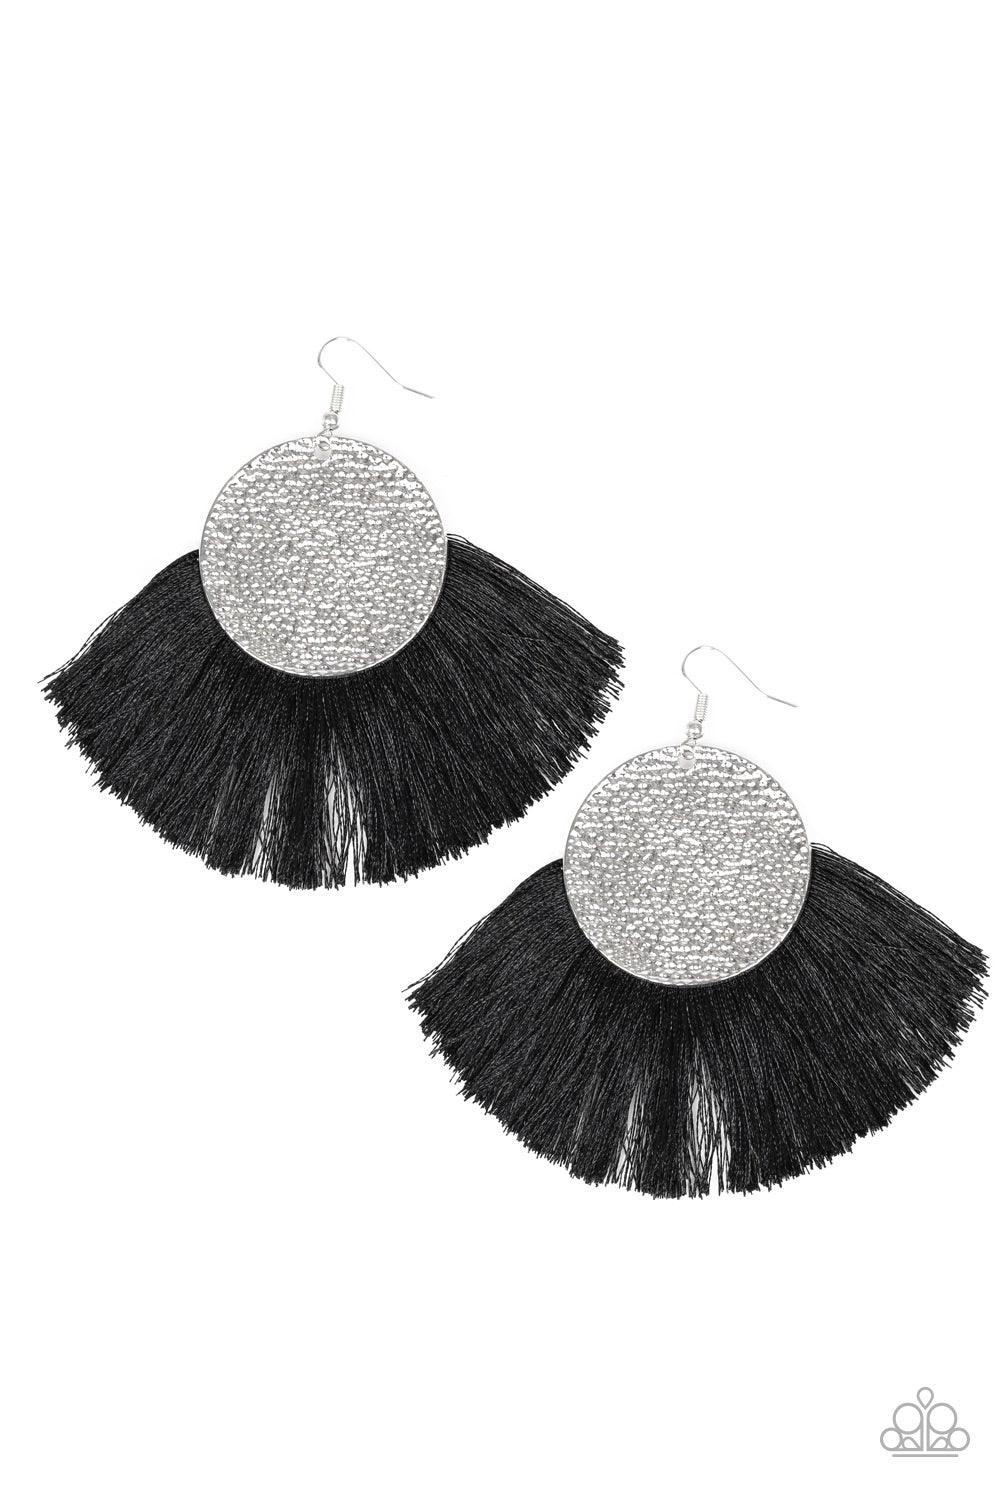 Paparazzi Accessories Foxtrot Fringe - Black A fan of shiny black thread flares out from the bottom of a hammered silver disc, creating a foxy fringe. Earring attaches to a standard fishhook fitting. Jewelry